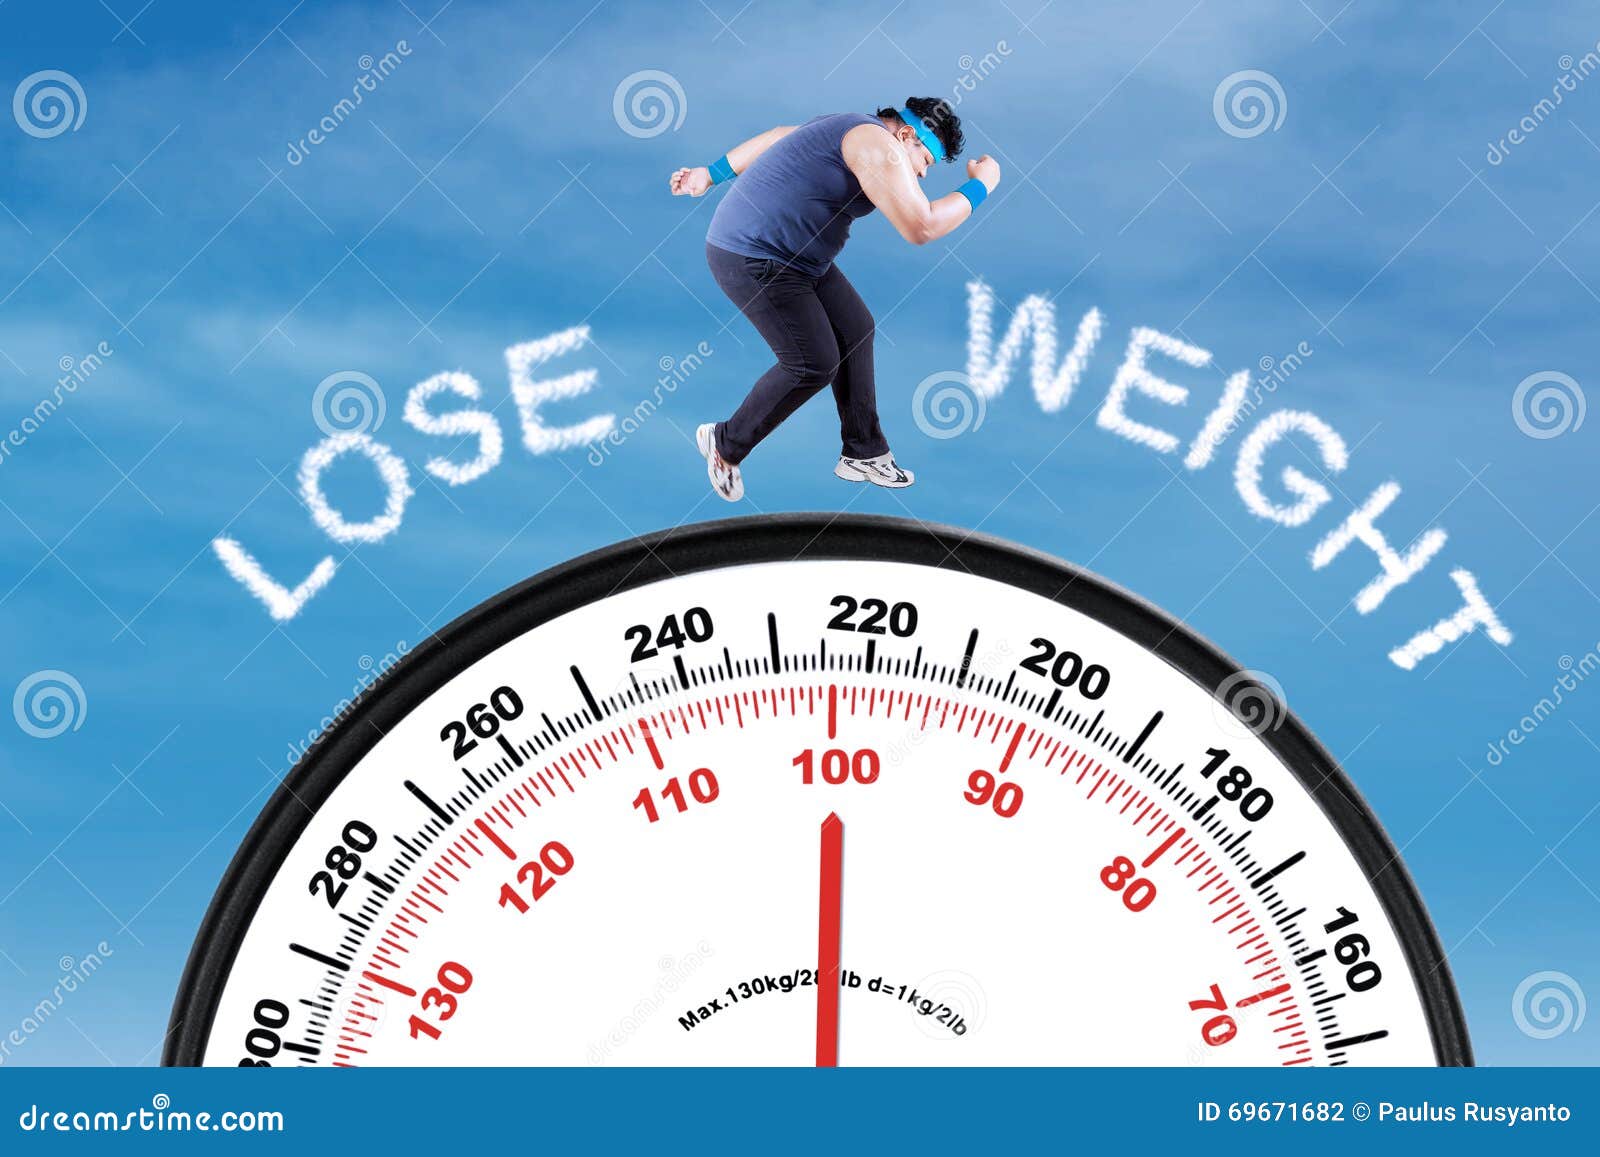 man with text lose weight and scale